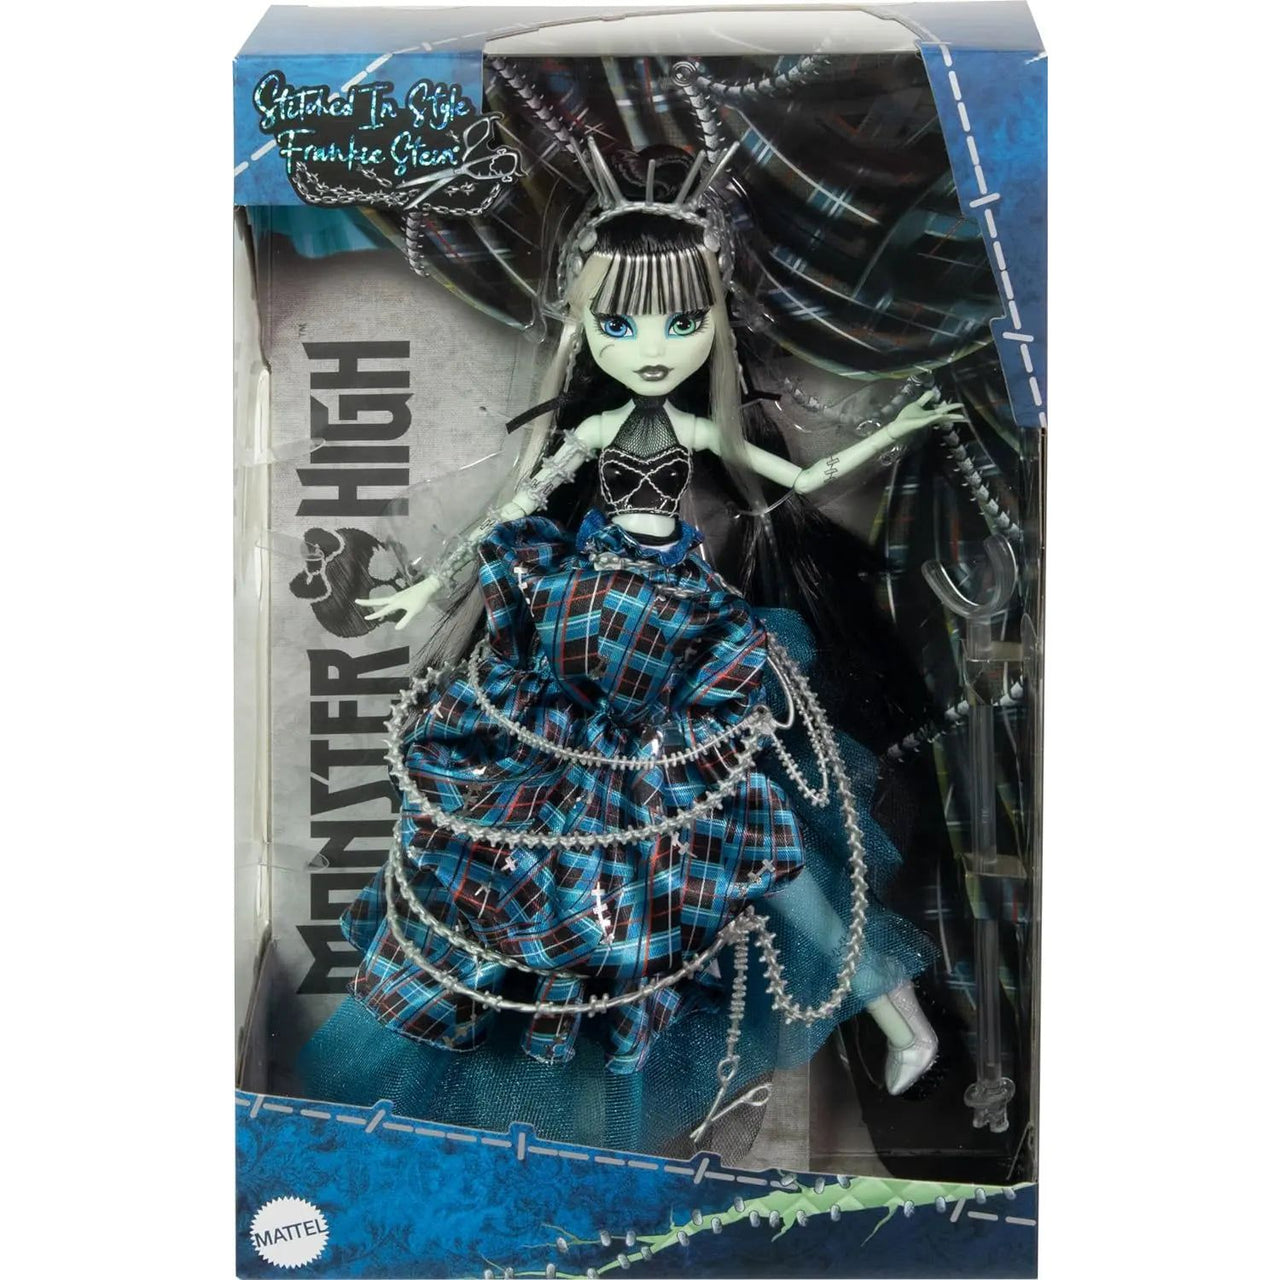 Monster High Frankie Stein Stitched in Style Fashion Collectible Doll Monster High